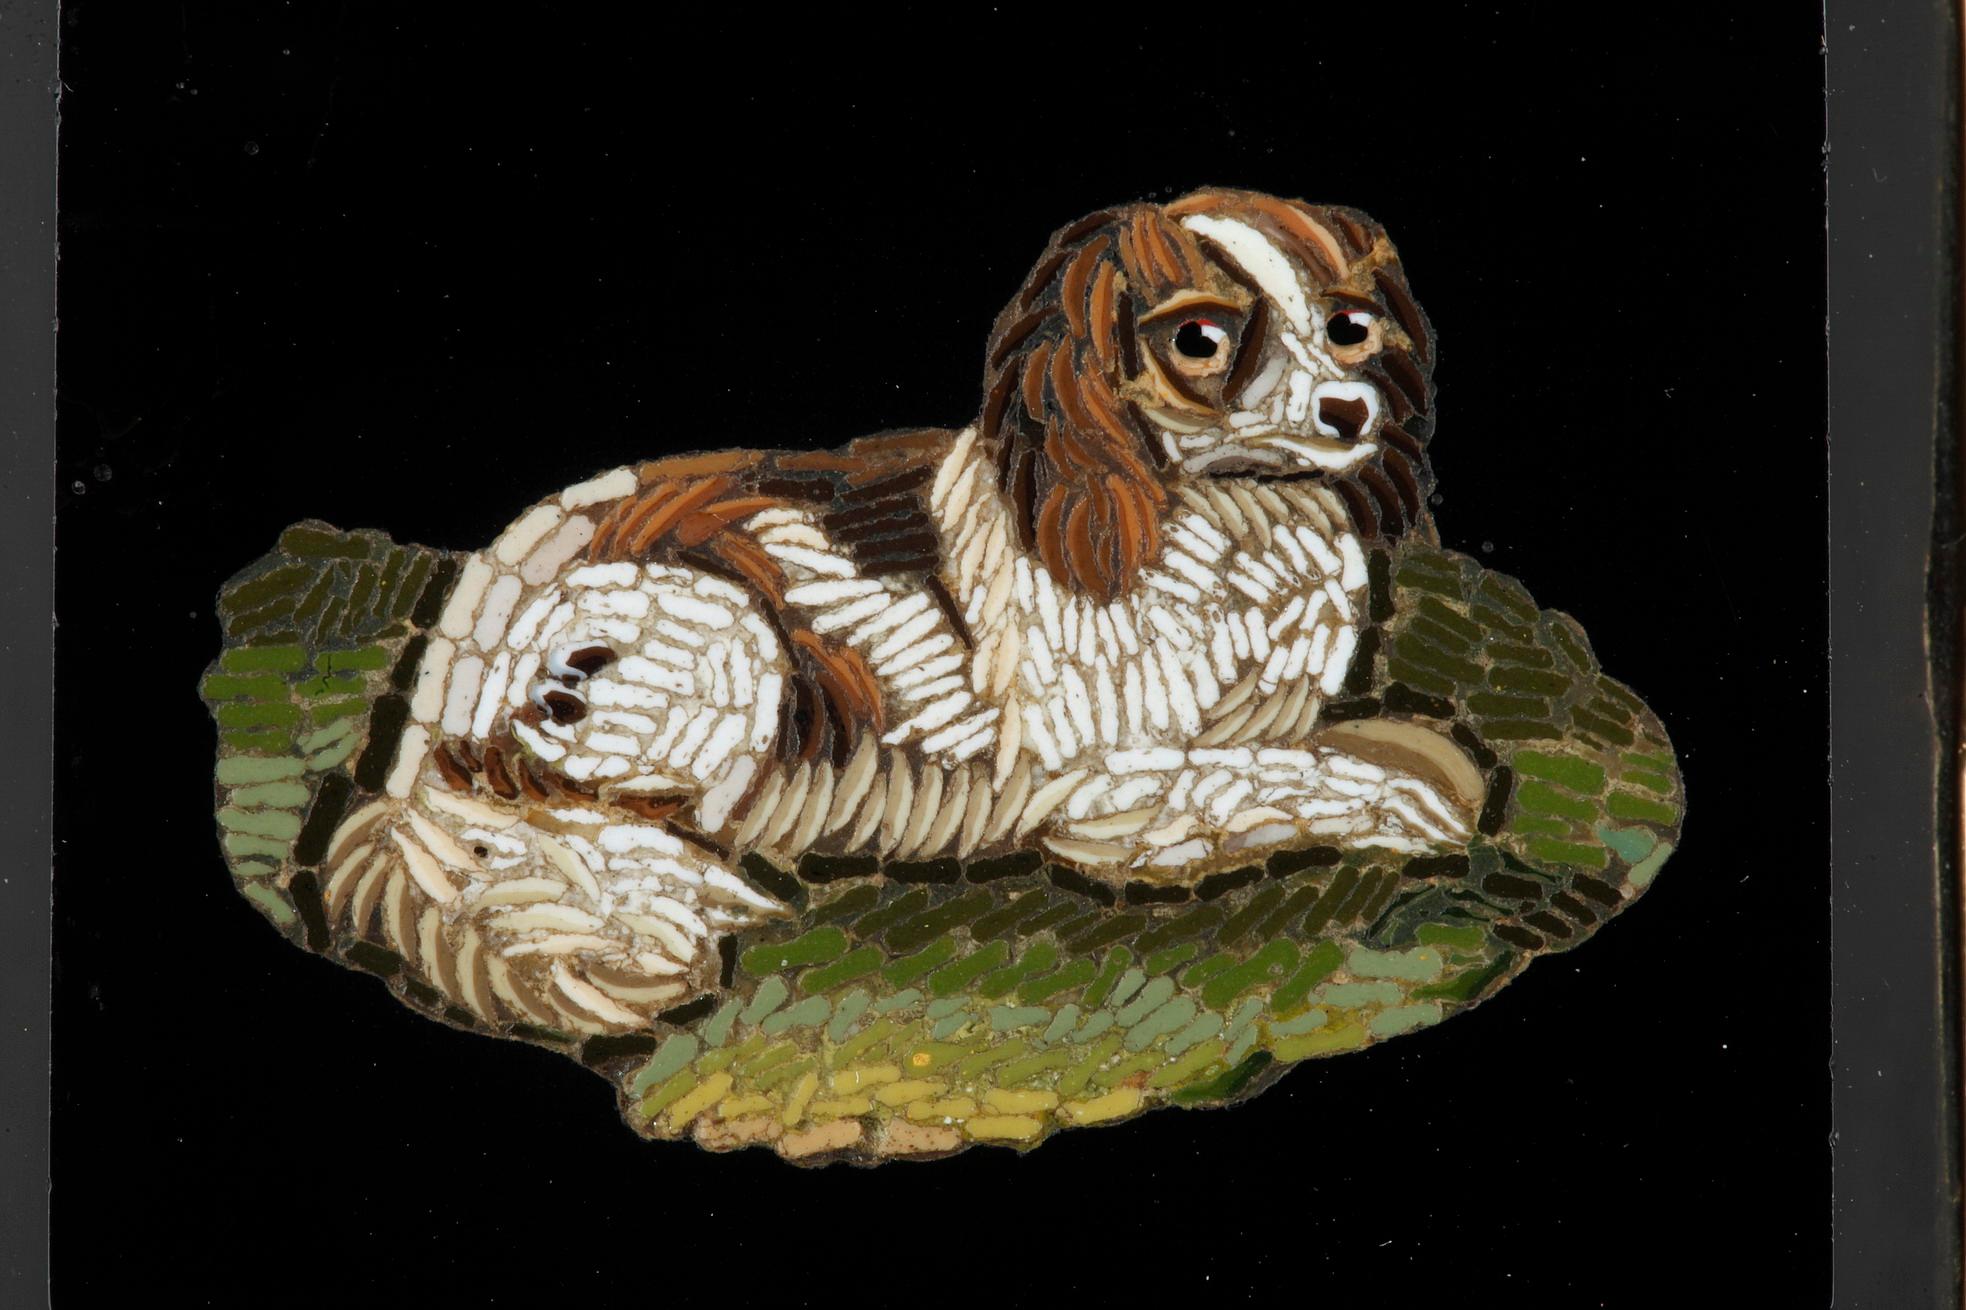 Brooch with a micromosaic set in a gold and royal blue enameled gold setting. Rectangular micromosaic on black onyx representing a spaniel lying in the grass. This composition is by artist Antonio Aguatti. This motif of a dog was a very popular